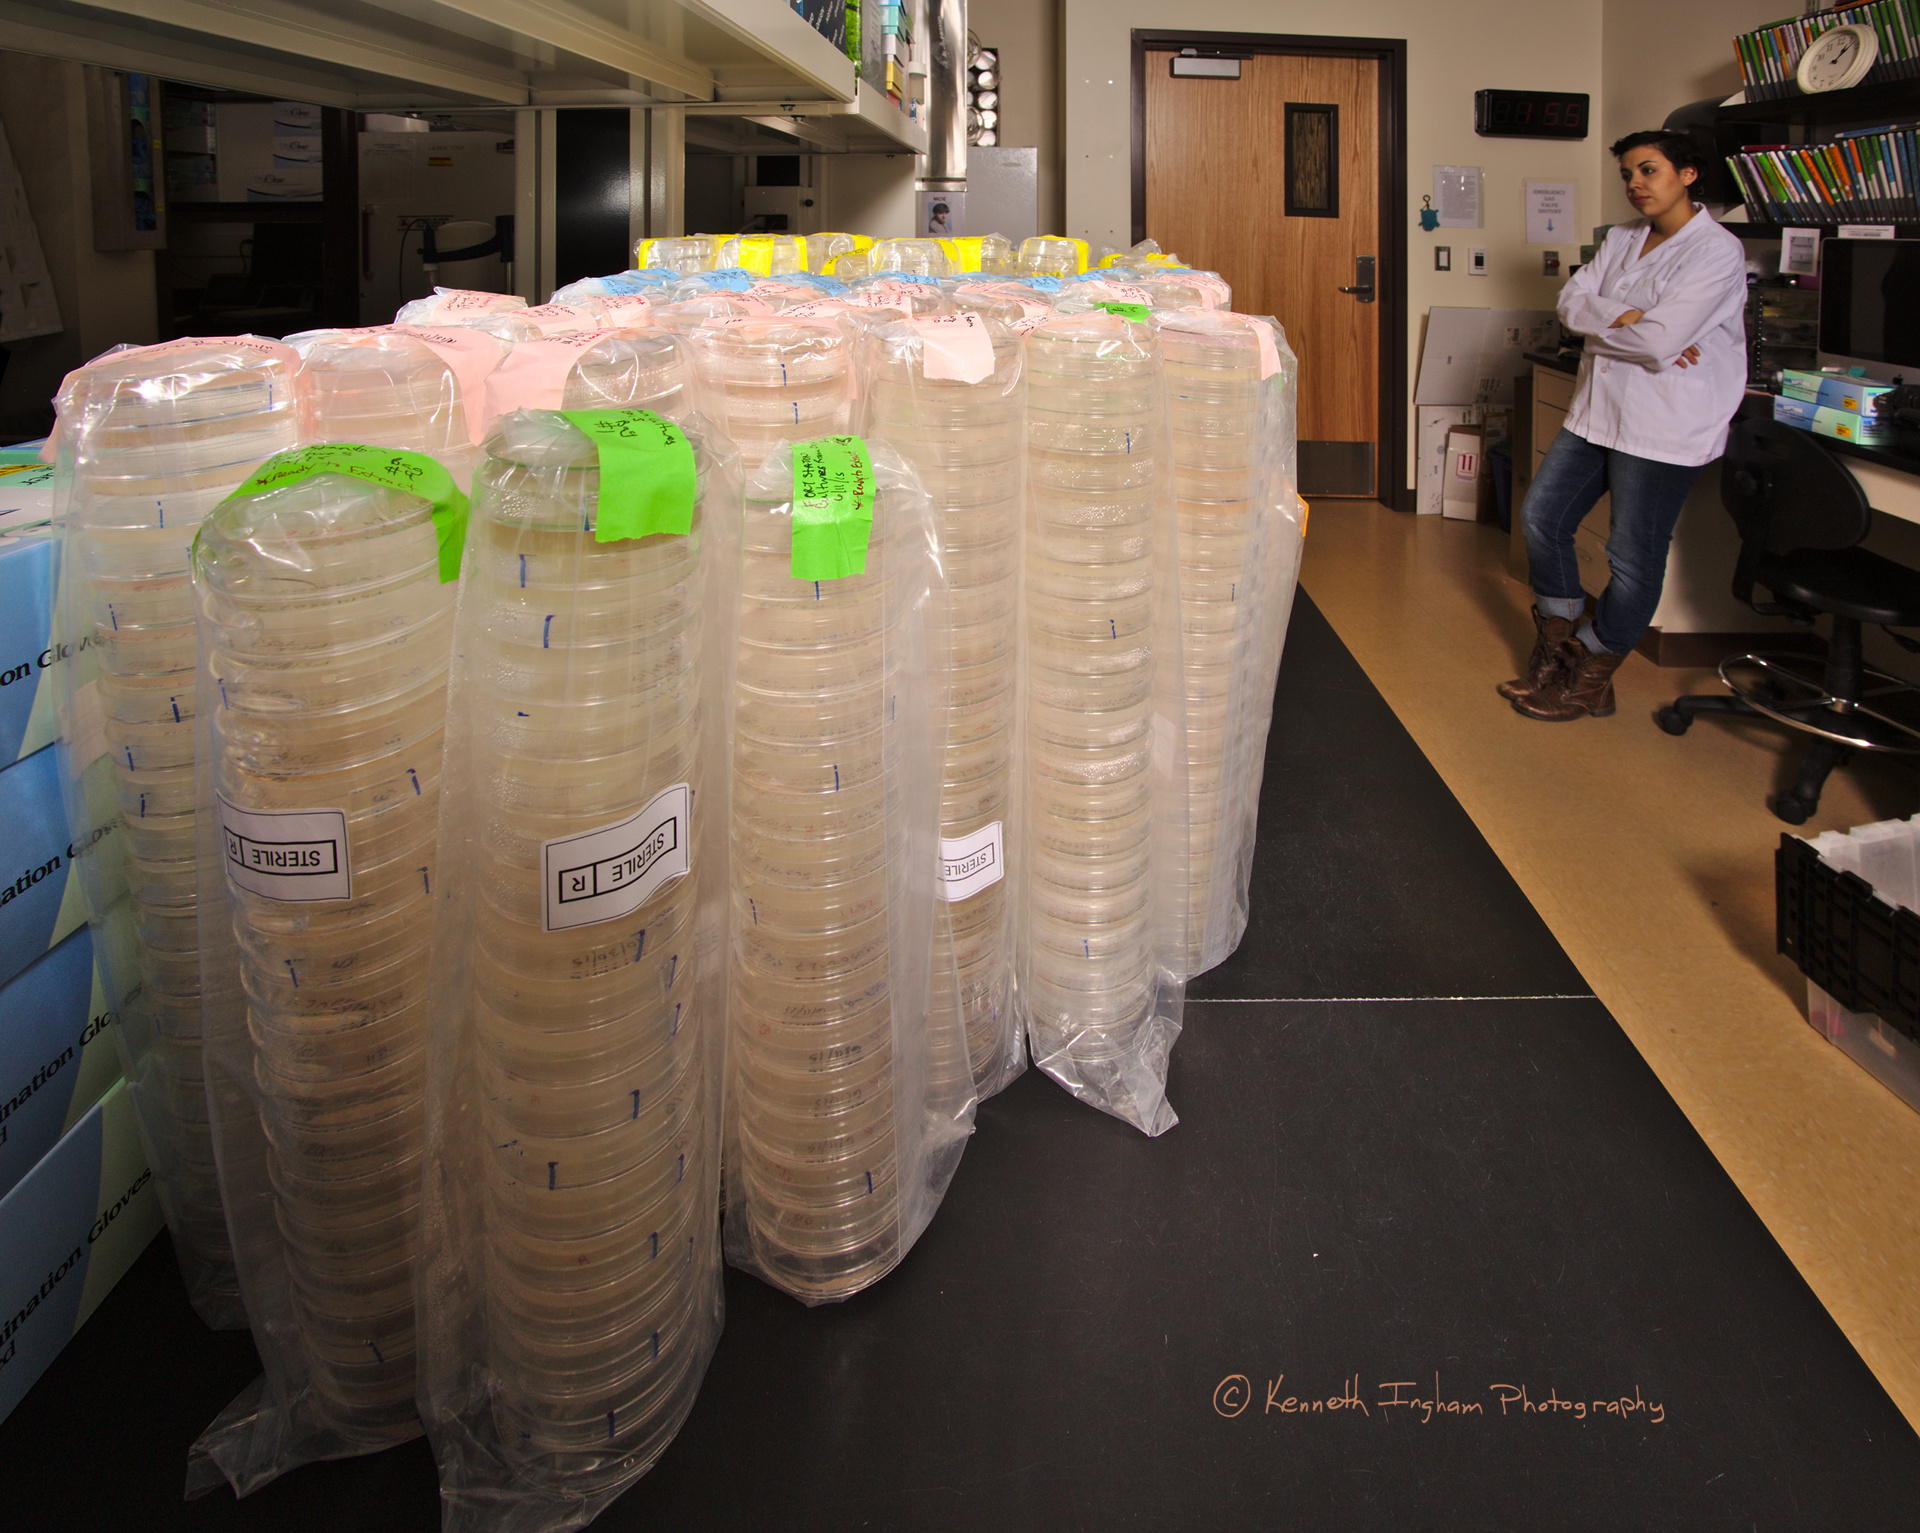 Nicole and the stacks of actinobacteria cultured from bats in NM and AZ